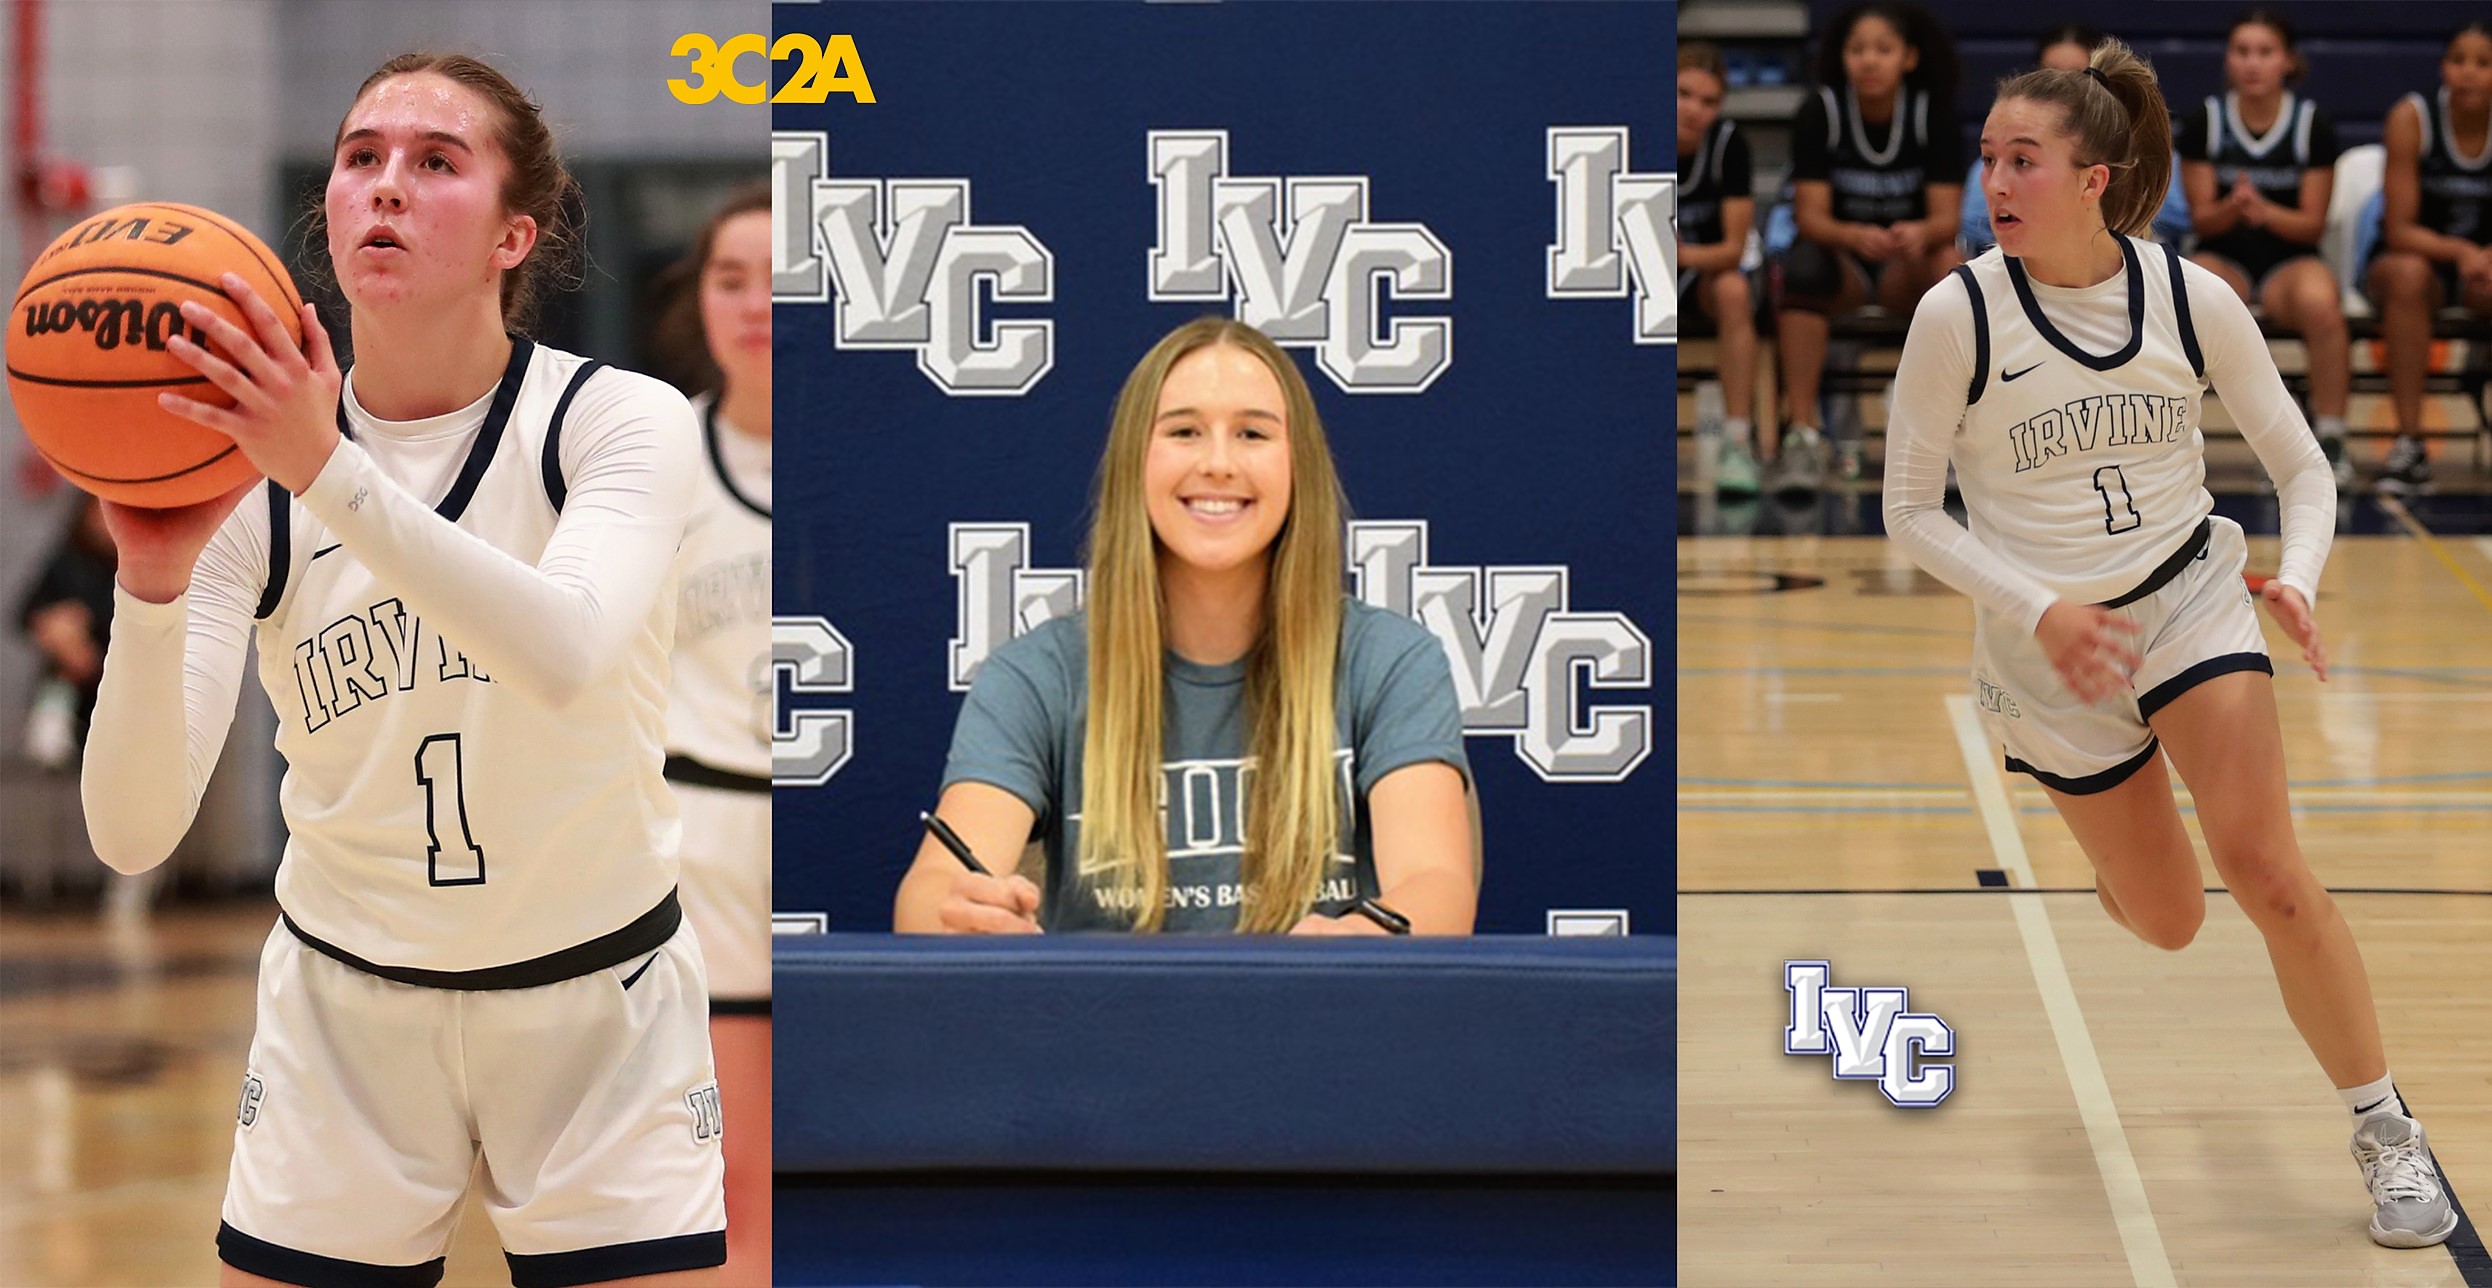 Irvine Valley's Kennedy Pucci makes 22-23 3C2A state honor roll